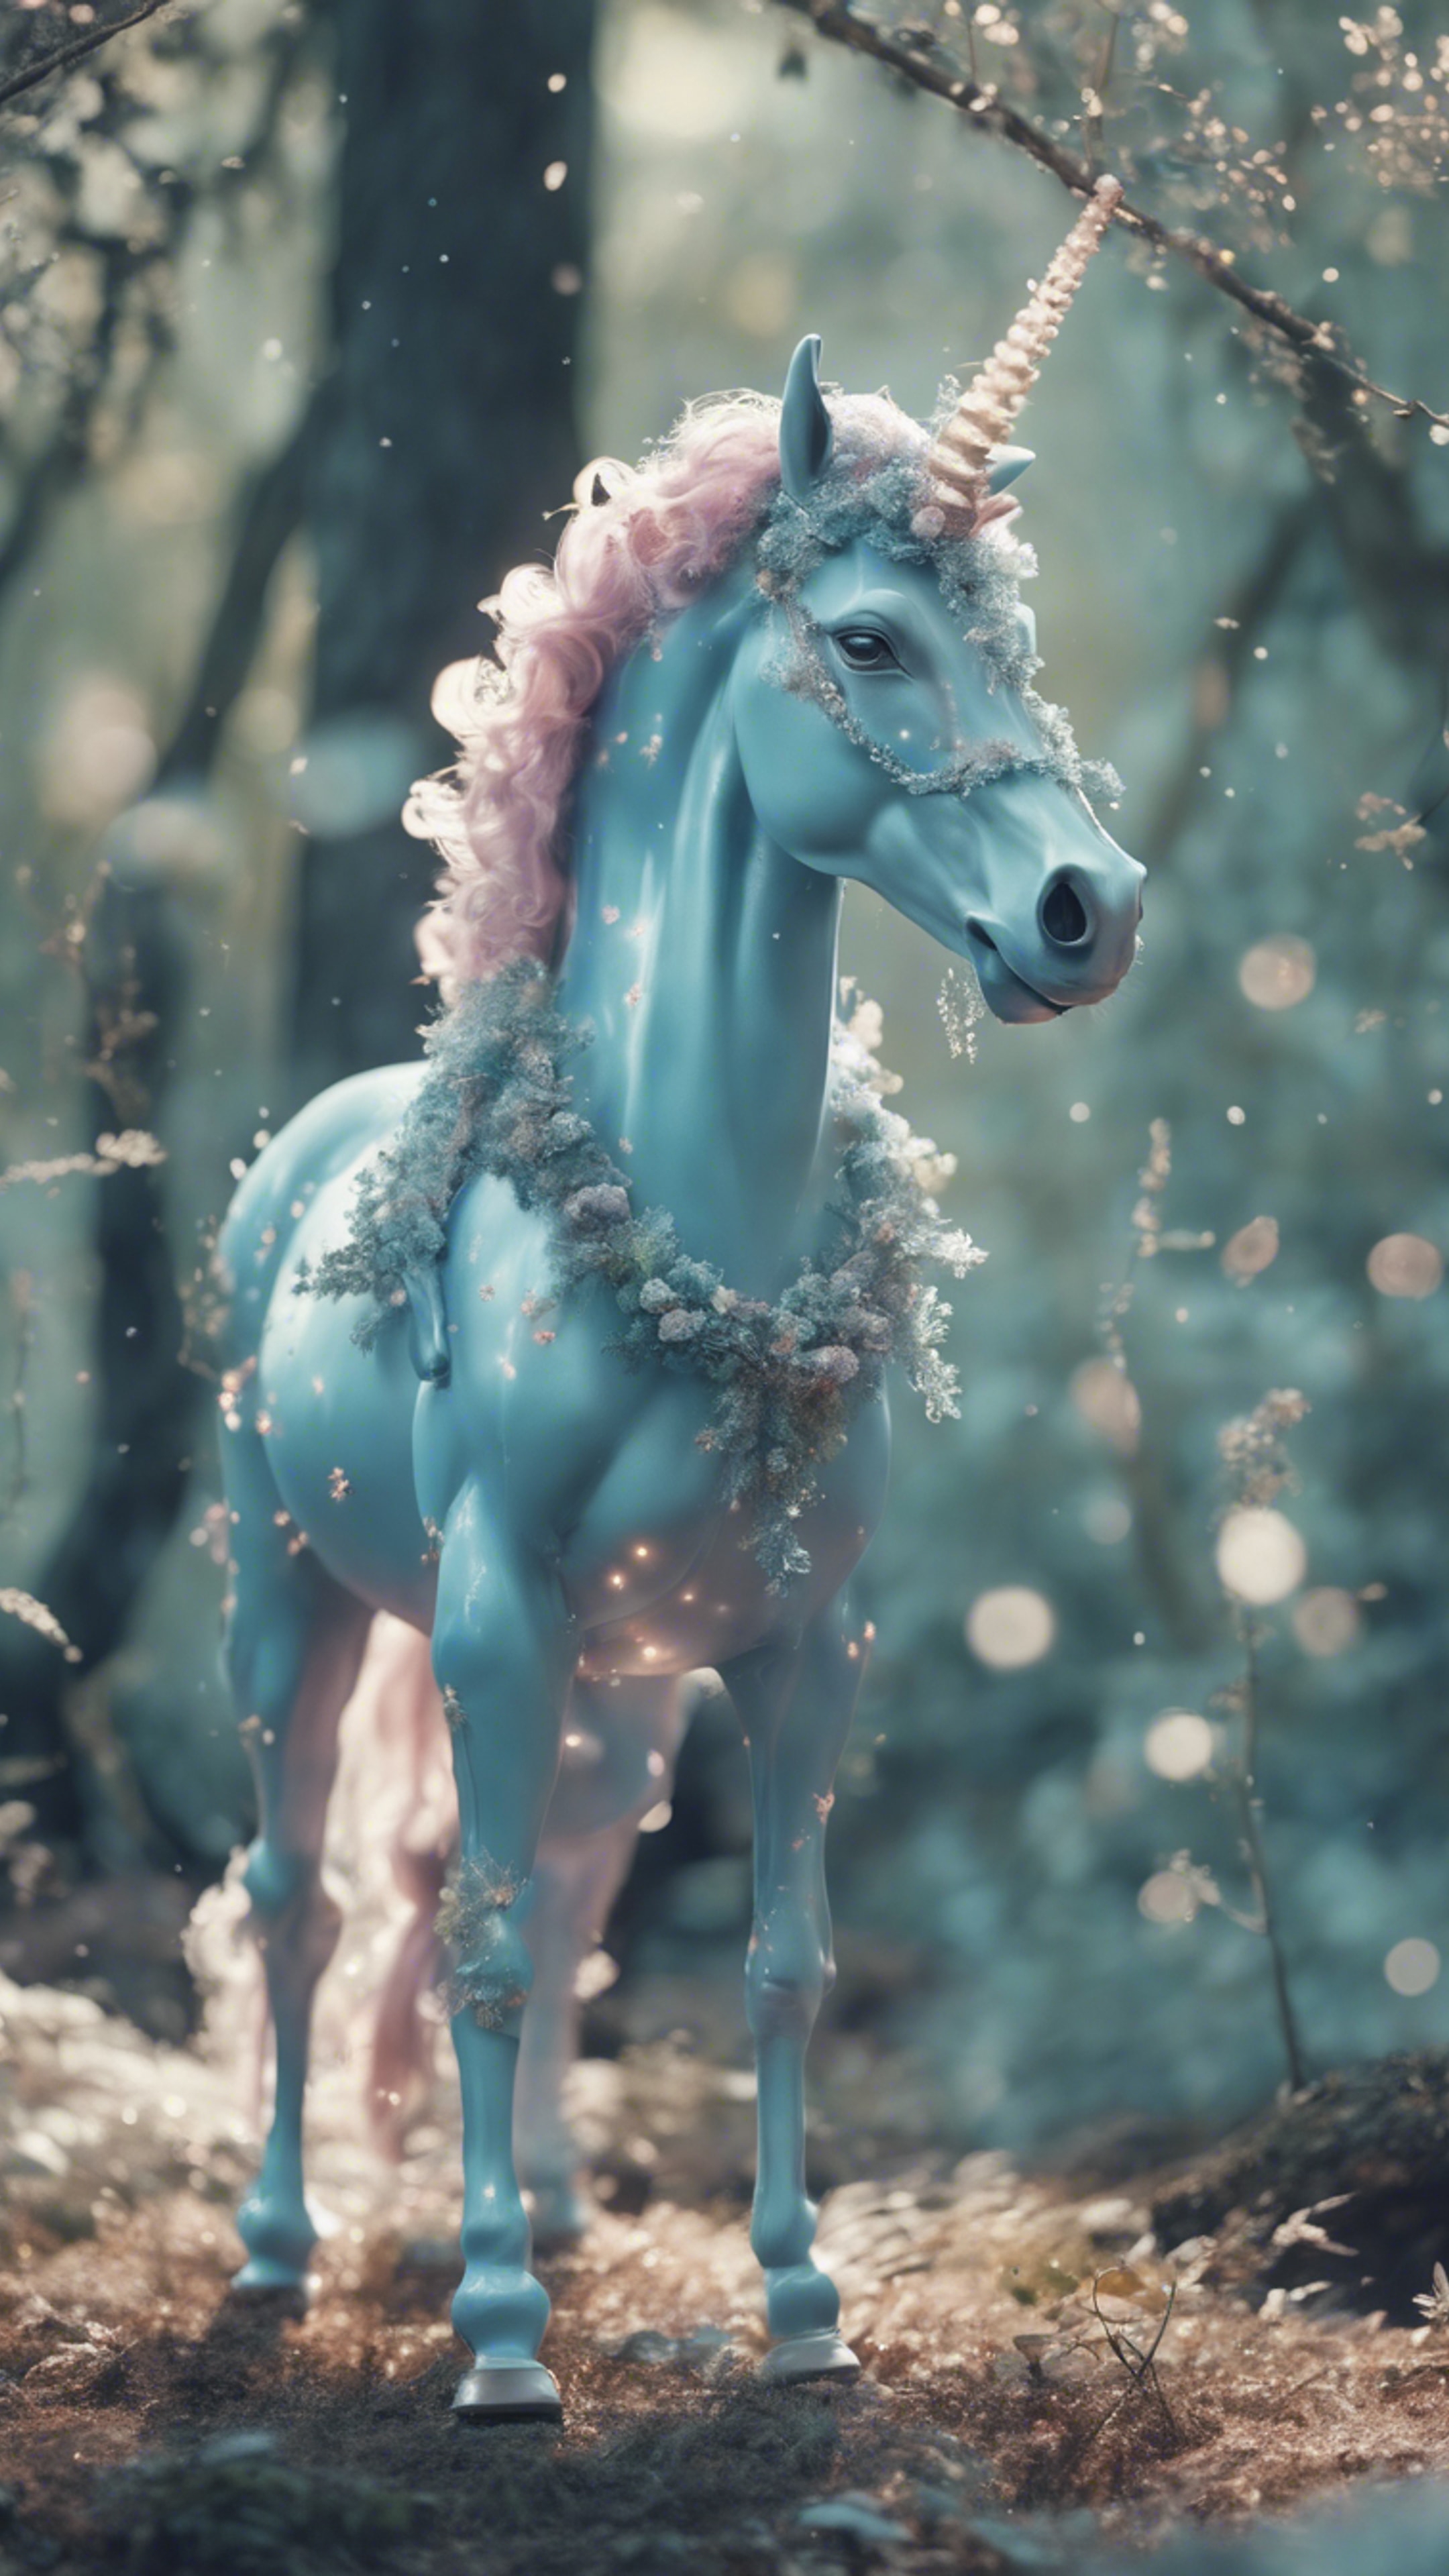 A whimsical pastel blue unicorn standing in a magical forest. Wallpaper[9fc4aee892994beaa25a]